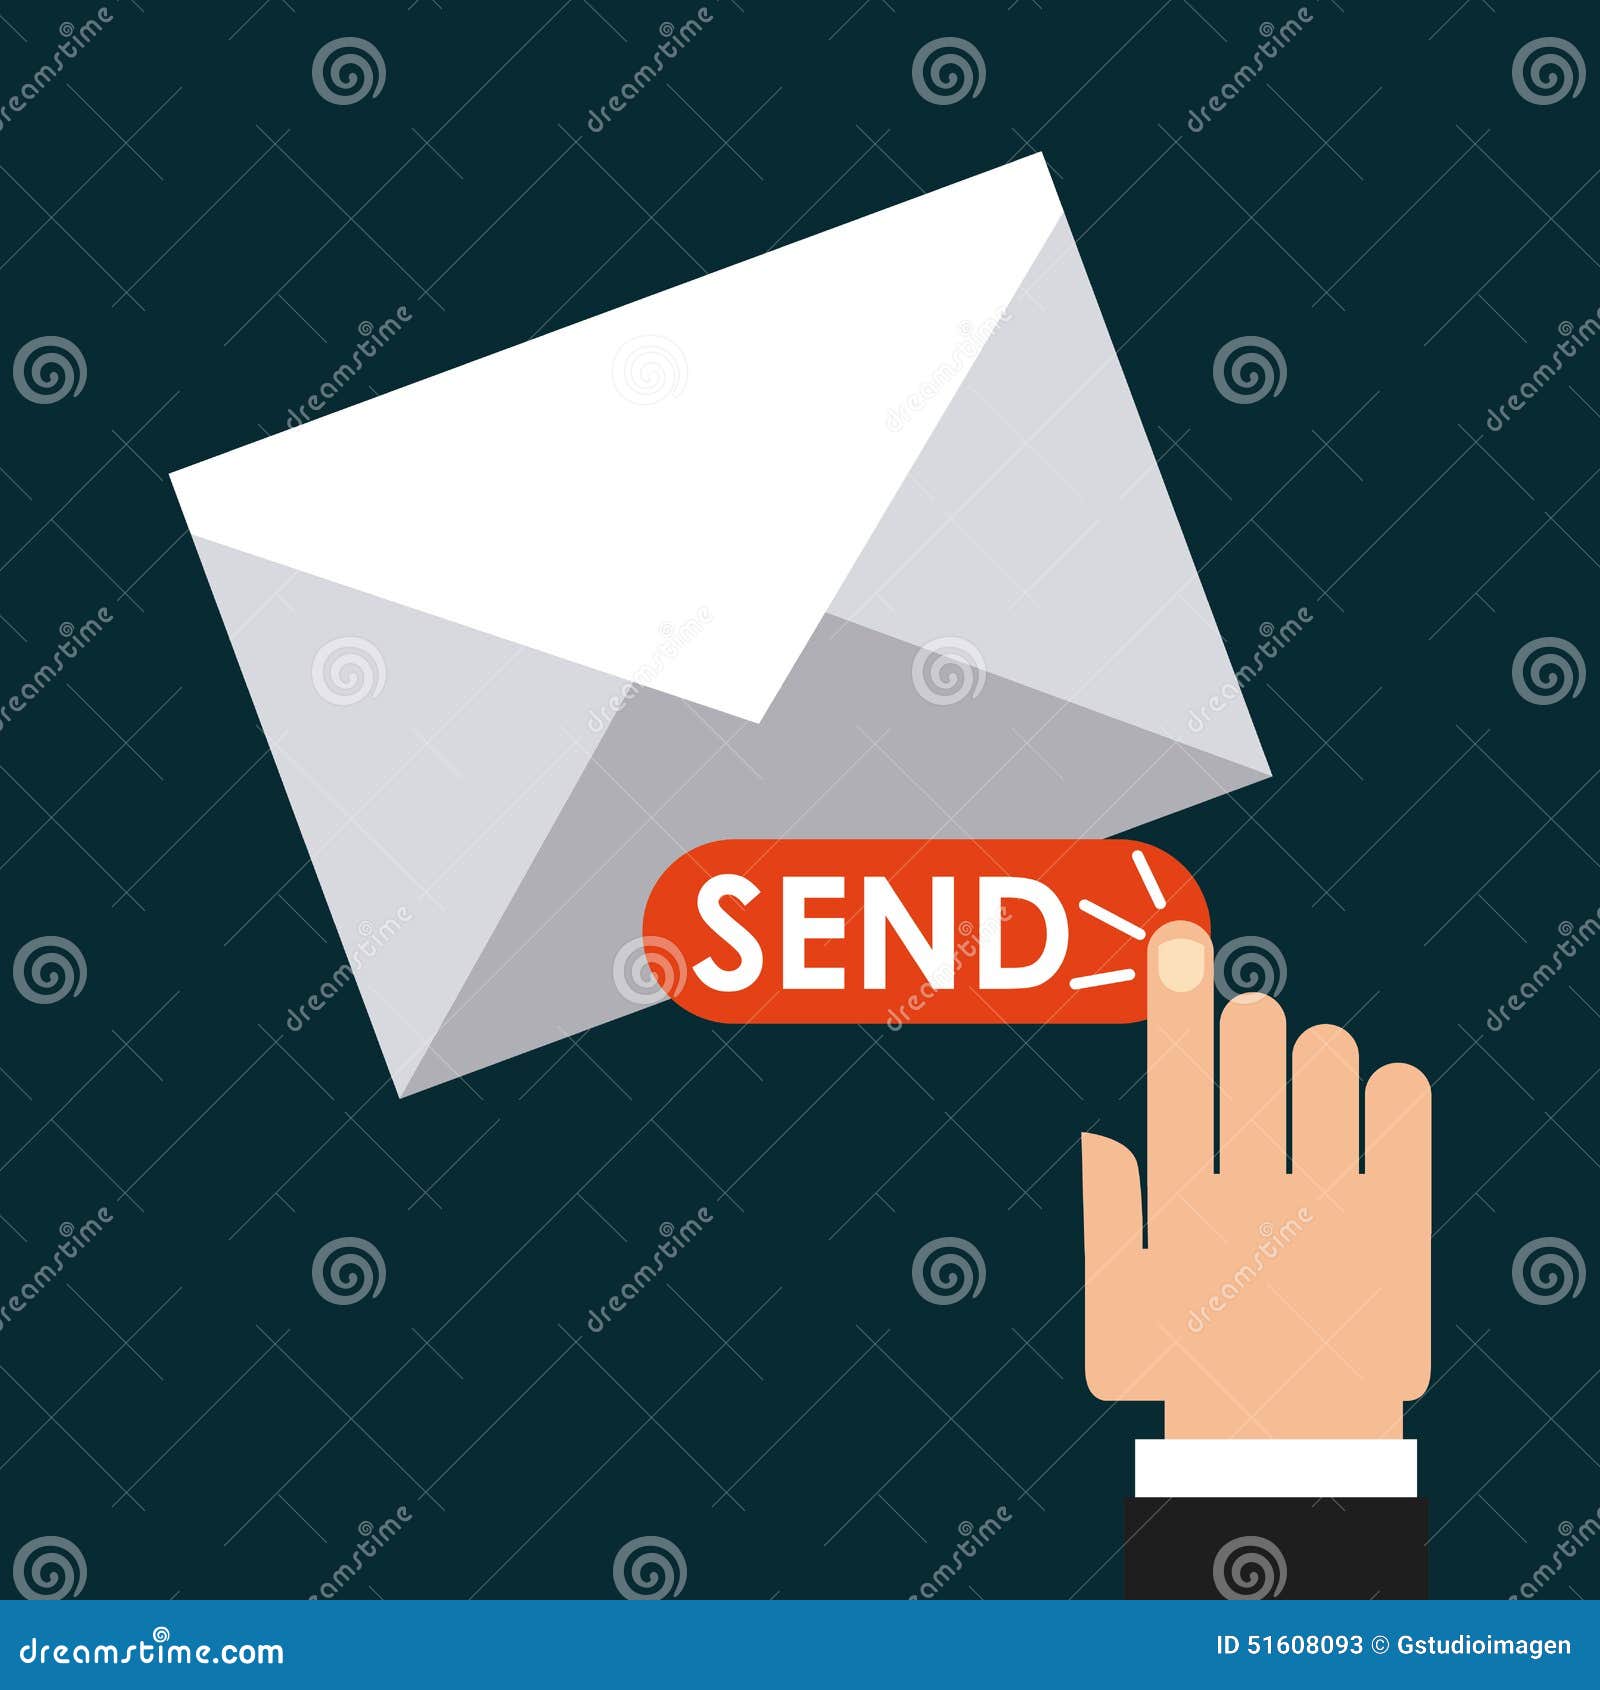 Email concept stock vector. Illustration of information - 51608093